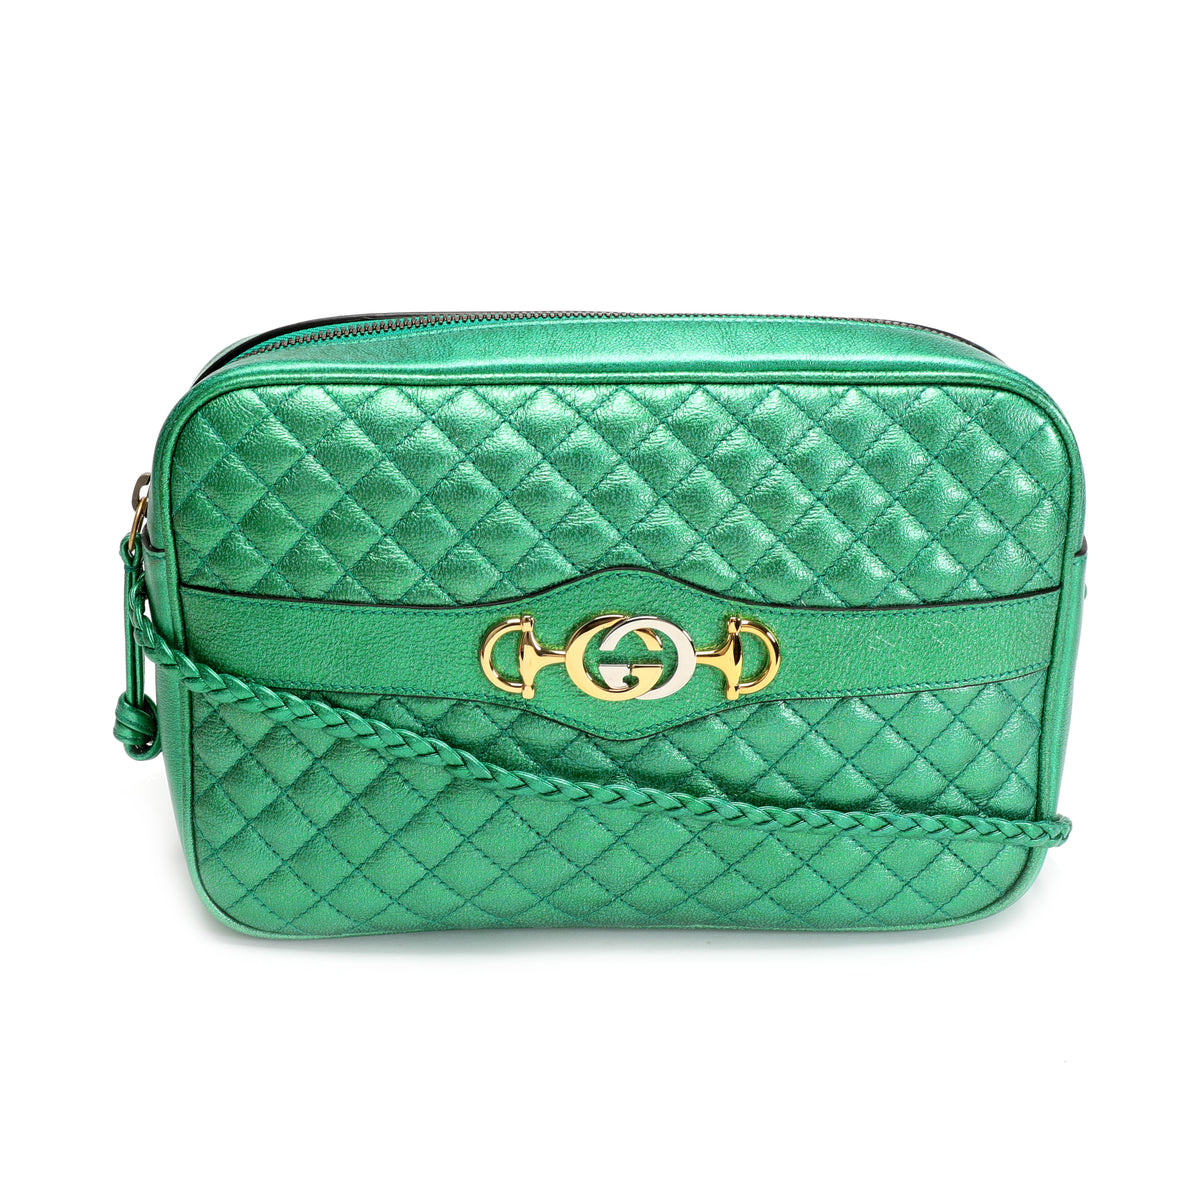 Gucci Jasmine Green Quilted Leather Trapuntata Camera Bag